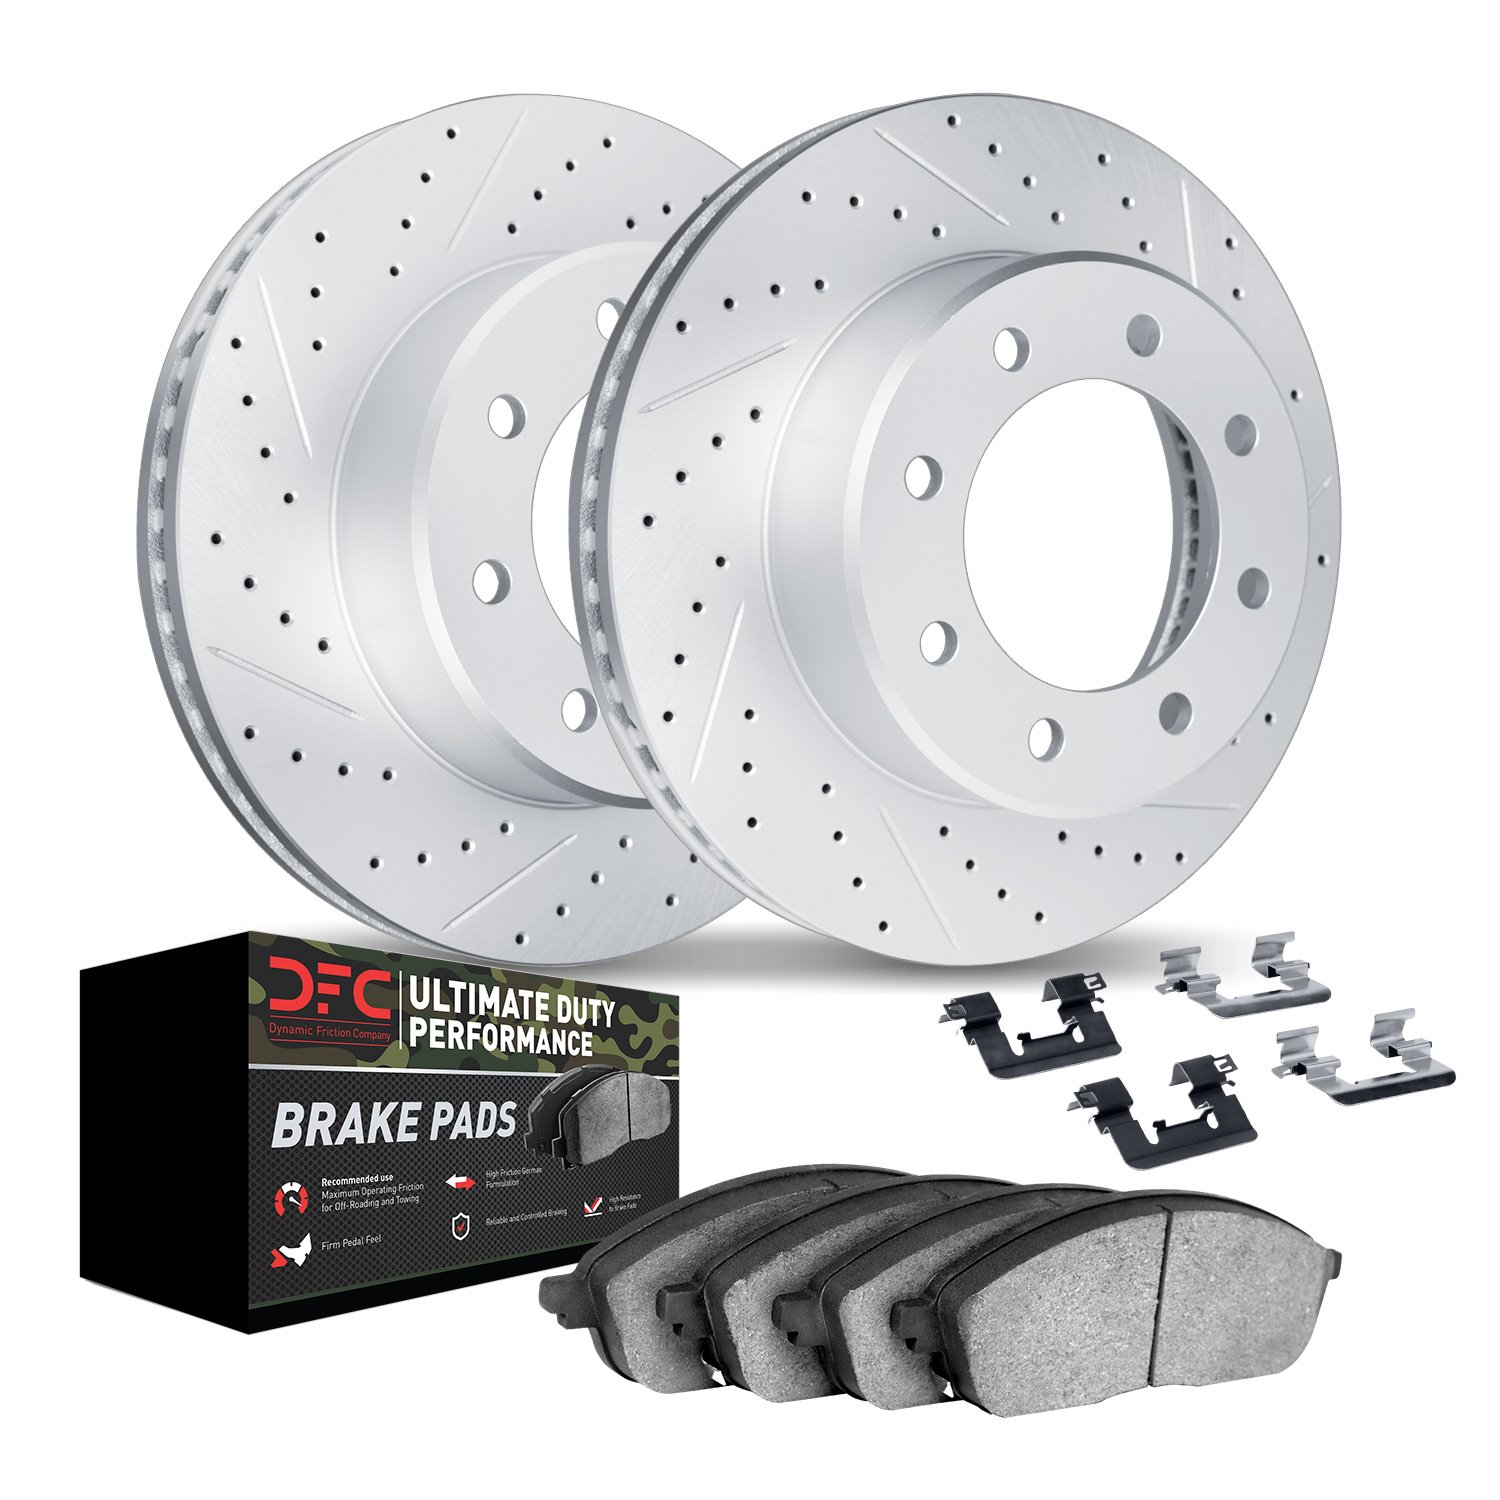 2412-54010 Geoperformance Drilled/Slotted Brake Rotors with Ultimate-Duty Brake Pads Kit & Hardware, 2000-2004 Ford/Lincoln/Merc